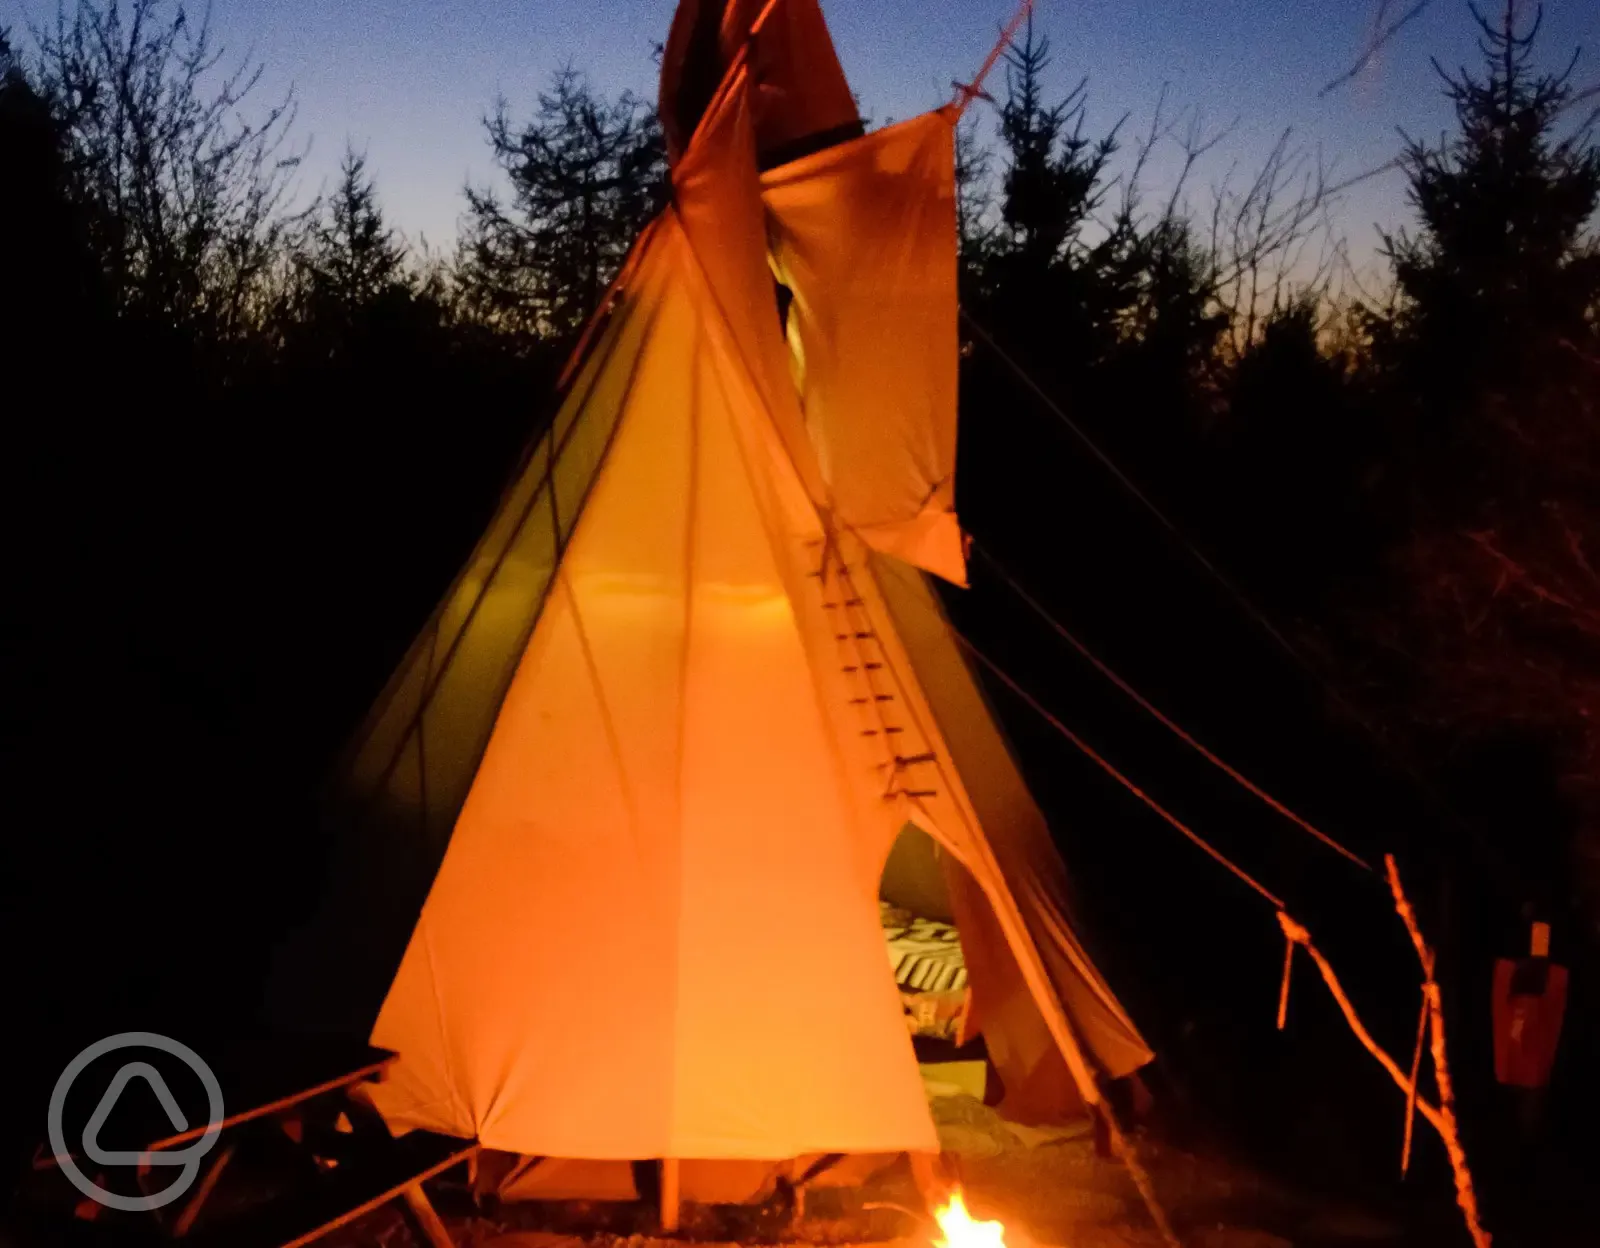 The Tipi with a camp fire